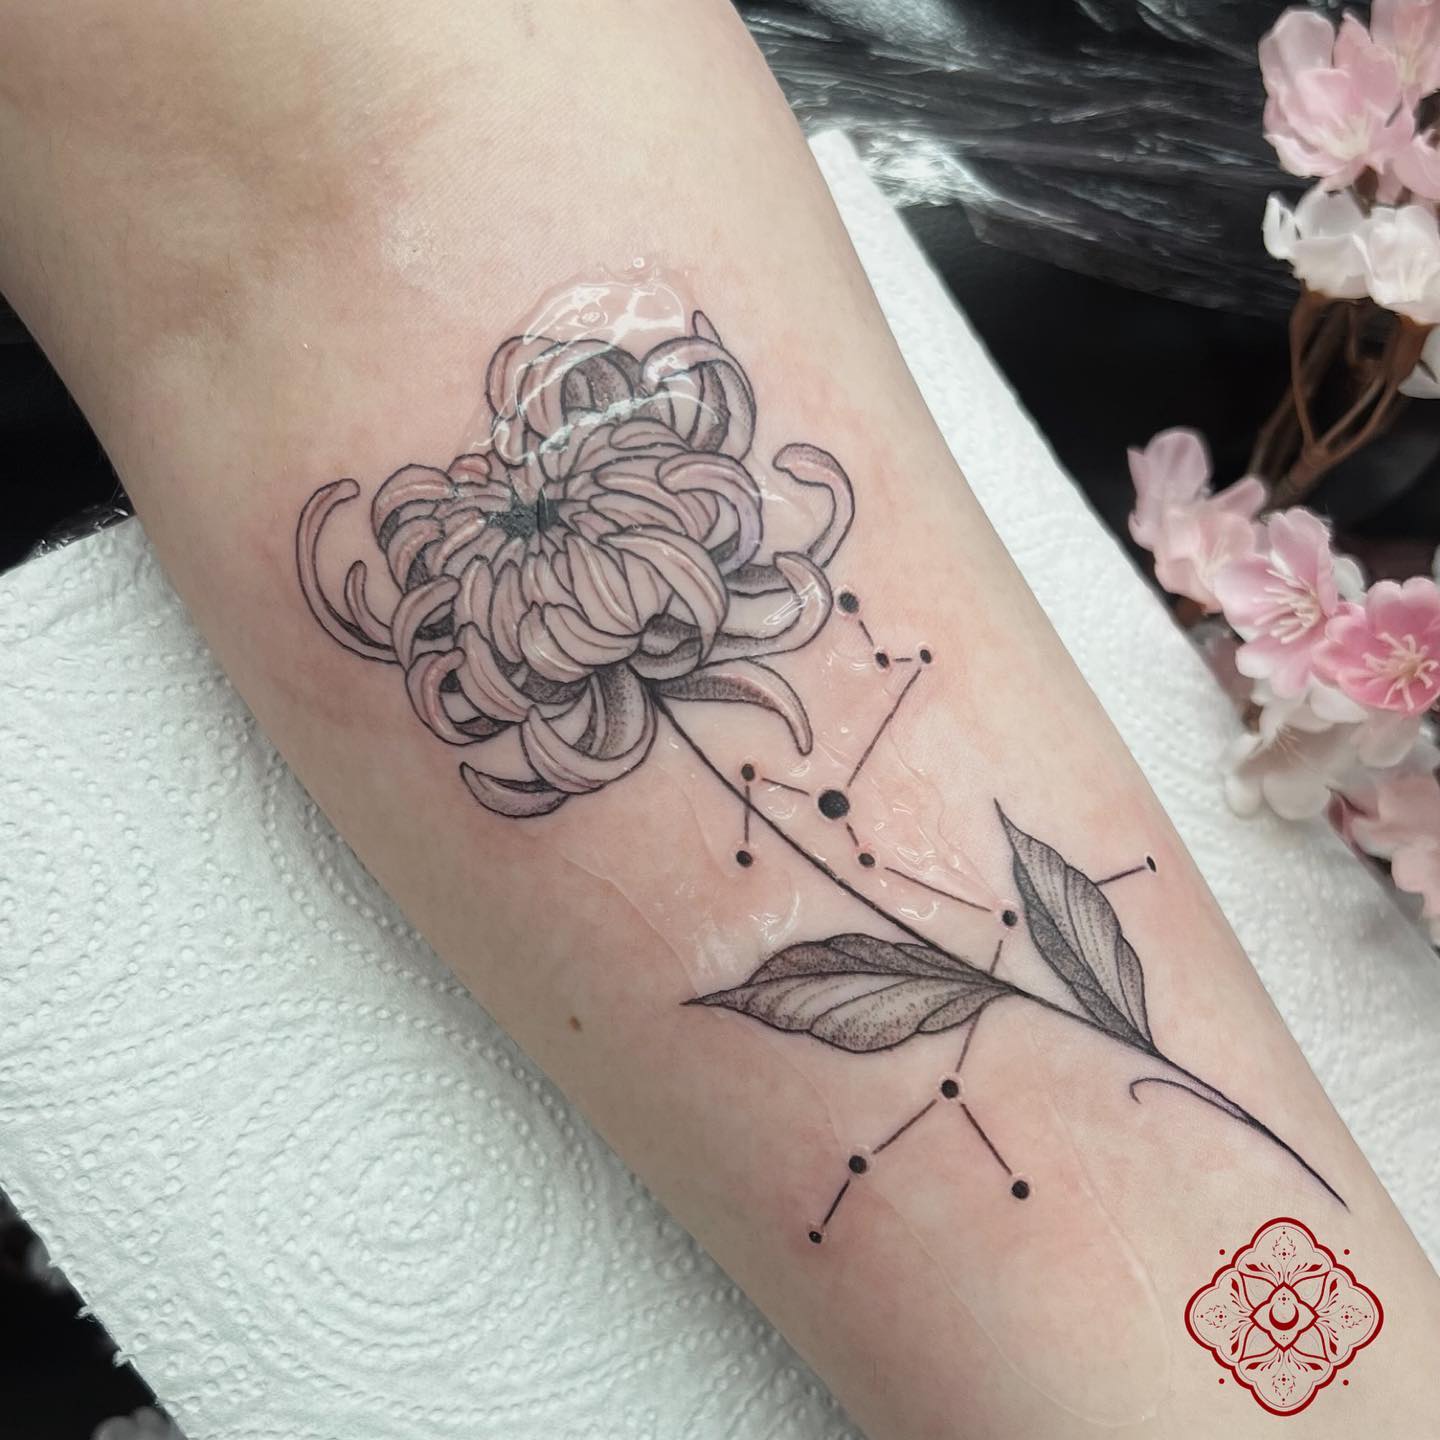 Chrysanthemum flower + Sagittarius constellation for Madeline Galloway 🫶🏻 Thanks for looking ✨

Done at studioxiiigallery

•
•
•
•
•
•
•
•
•
•
•
•
•
•

                     